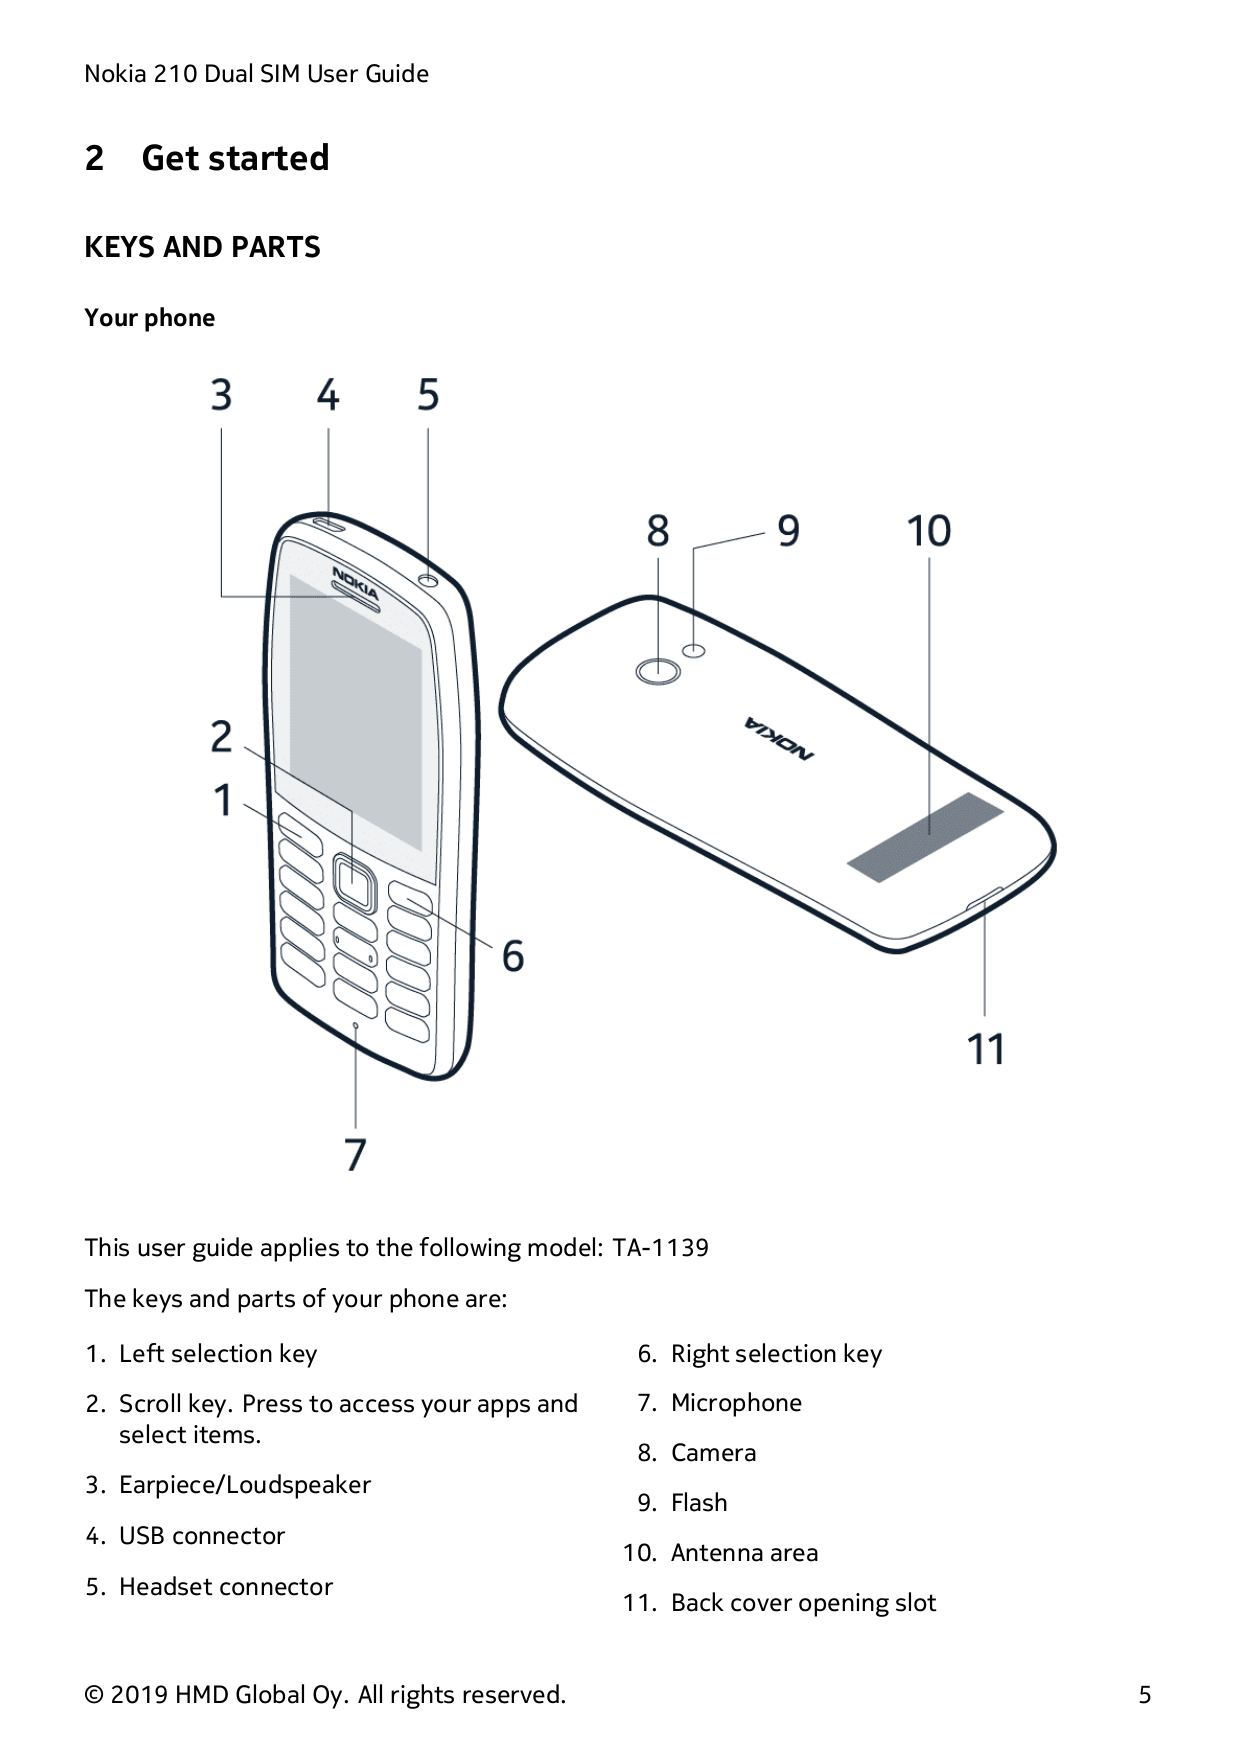 Nokia 210 Dual SIM User Guide2Get startedKEYS AND PARTSYour phoneThis user guide applies to the following model: TA-1139The keys